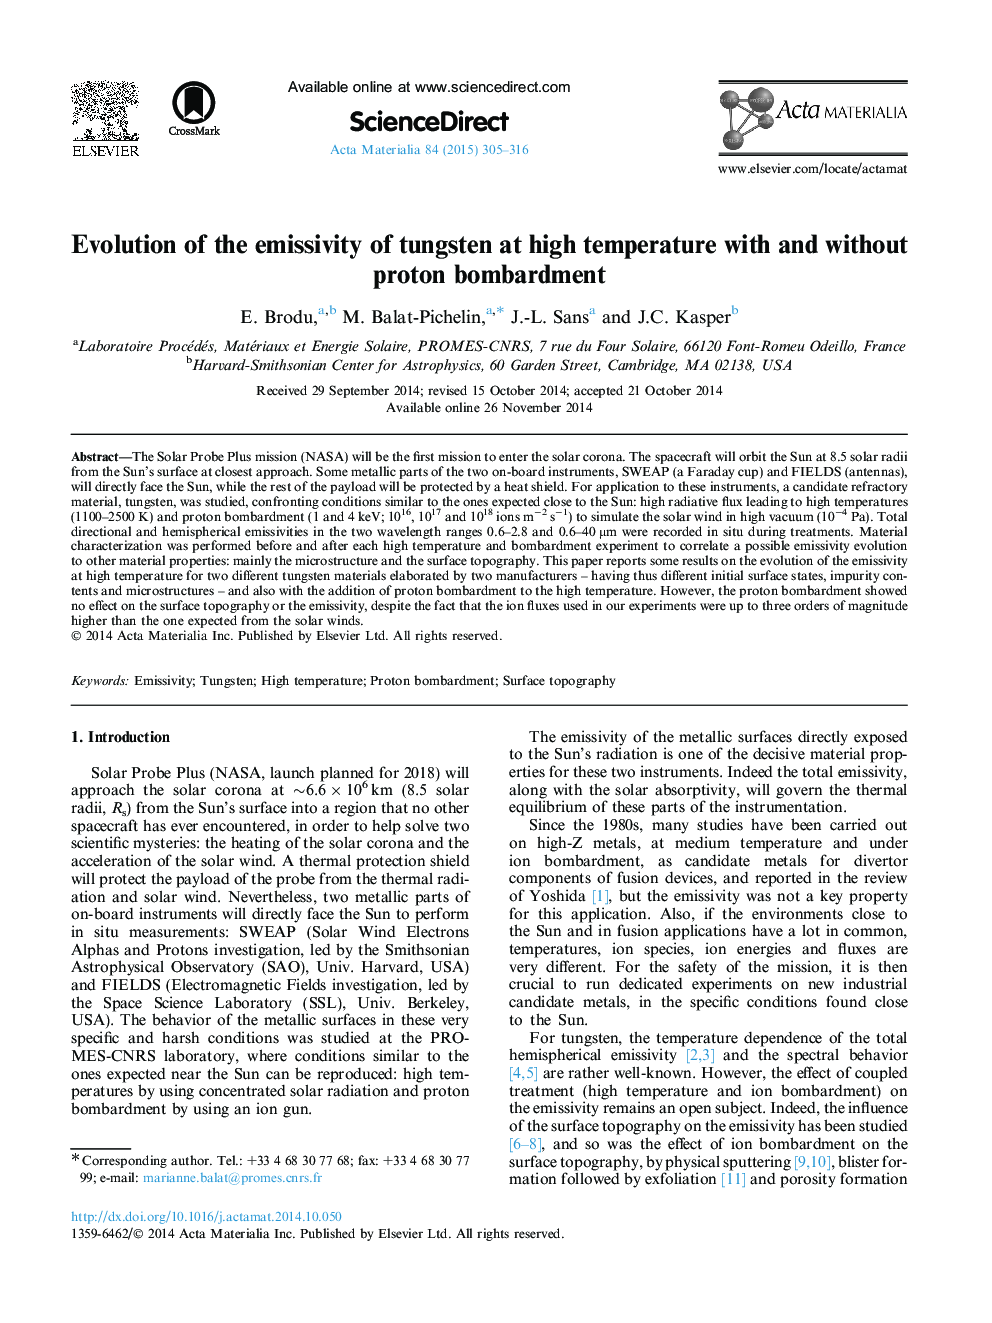 Evolution of the emissivity of tungsten at high temperature with and without proton bombardment